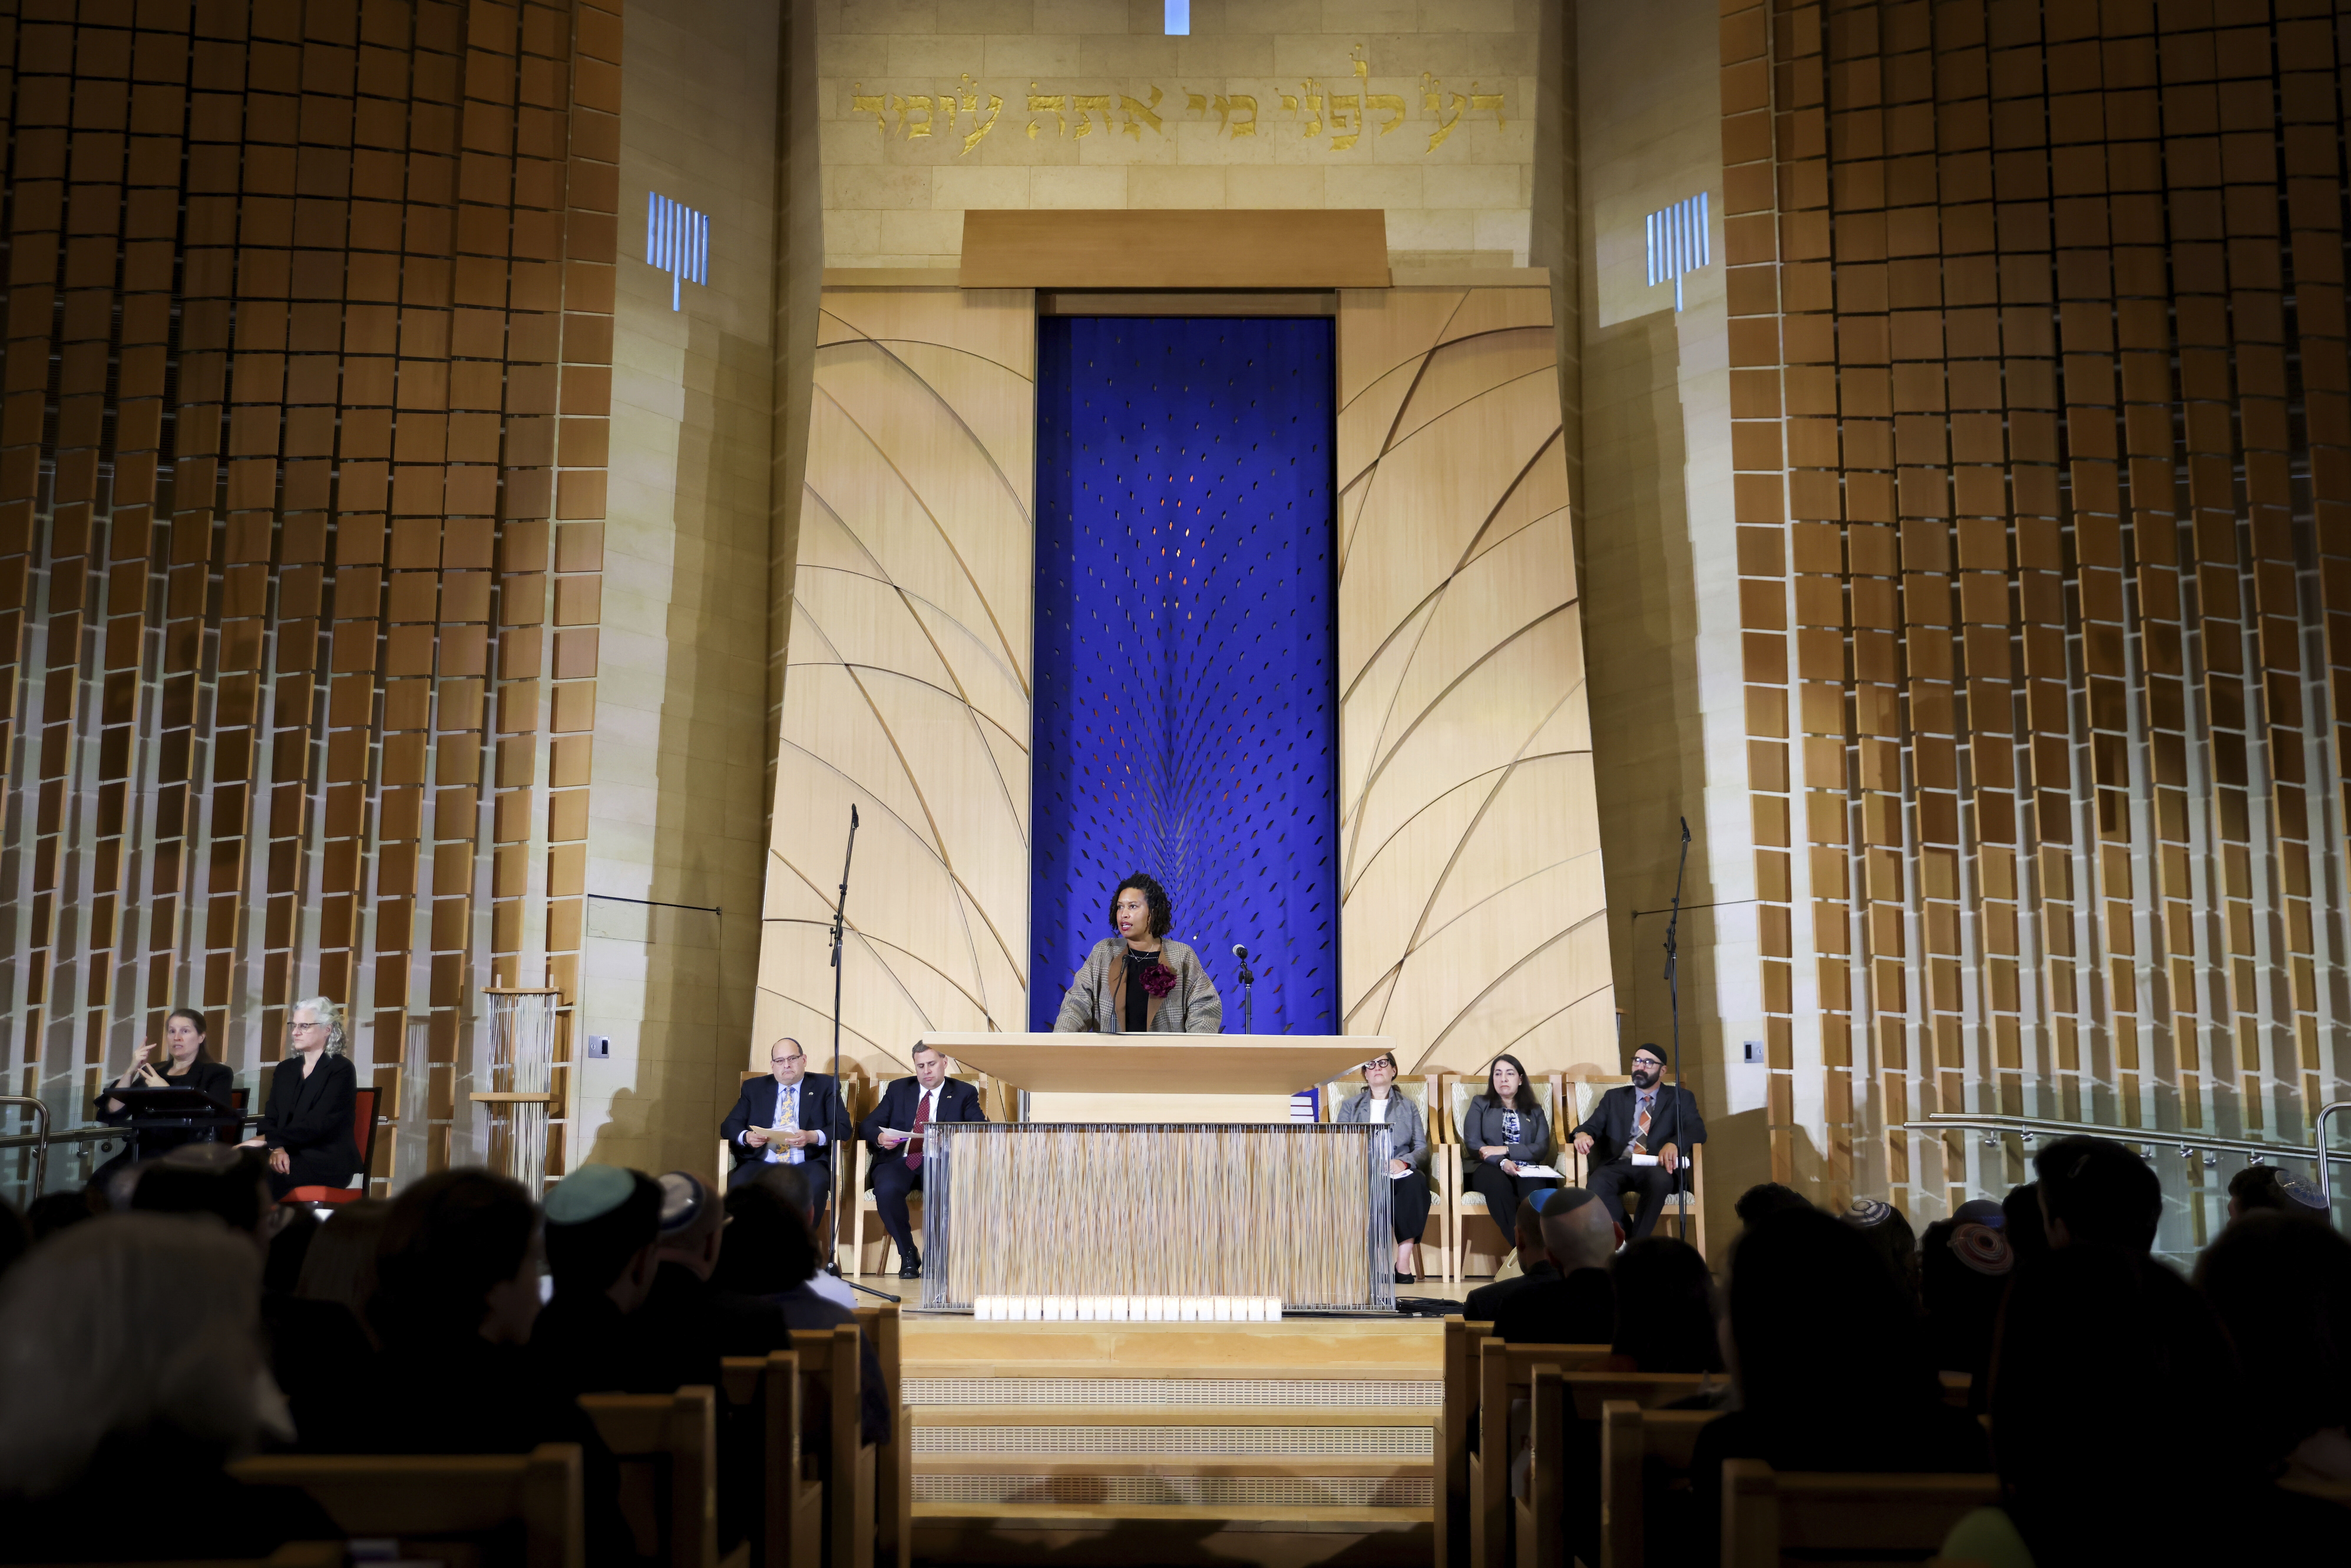 <p>Every seat was filled in the sanctuary, with some attendees sitting on the floor to hear leaders speak.</p>
<p>Small blue and white Israeli flags hung from the crowded balcony and a blue and white projection covered the front of the synagogue.</p>
<p>&#8220;We recognize that the acts of terrorism are unfolding nearly 6,000 miles away. But we know the pain and impact is right here in this room and in our city. I want to extend my sympathy and solidarity to everyone who was hurting and living in fear these past four days,&#8221; Bowser said.</p>
